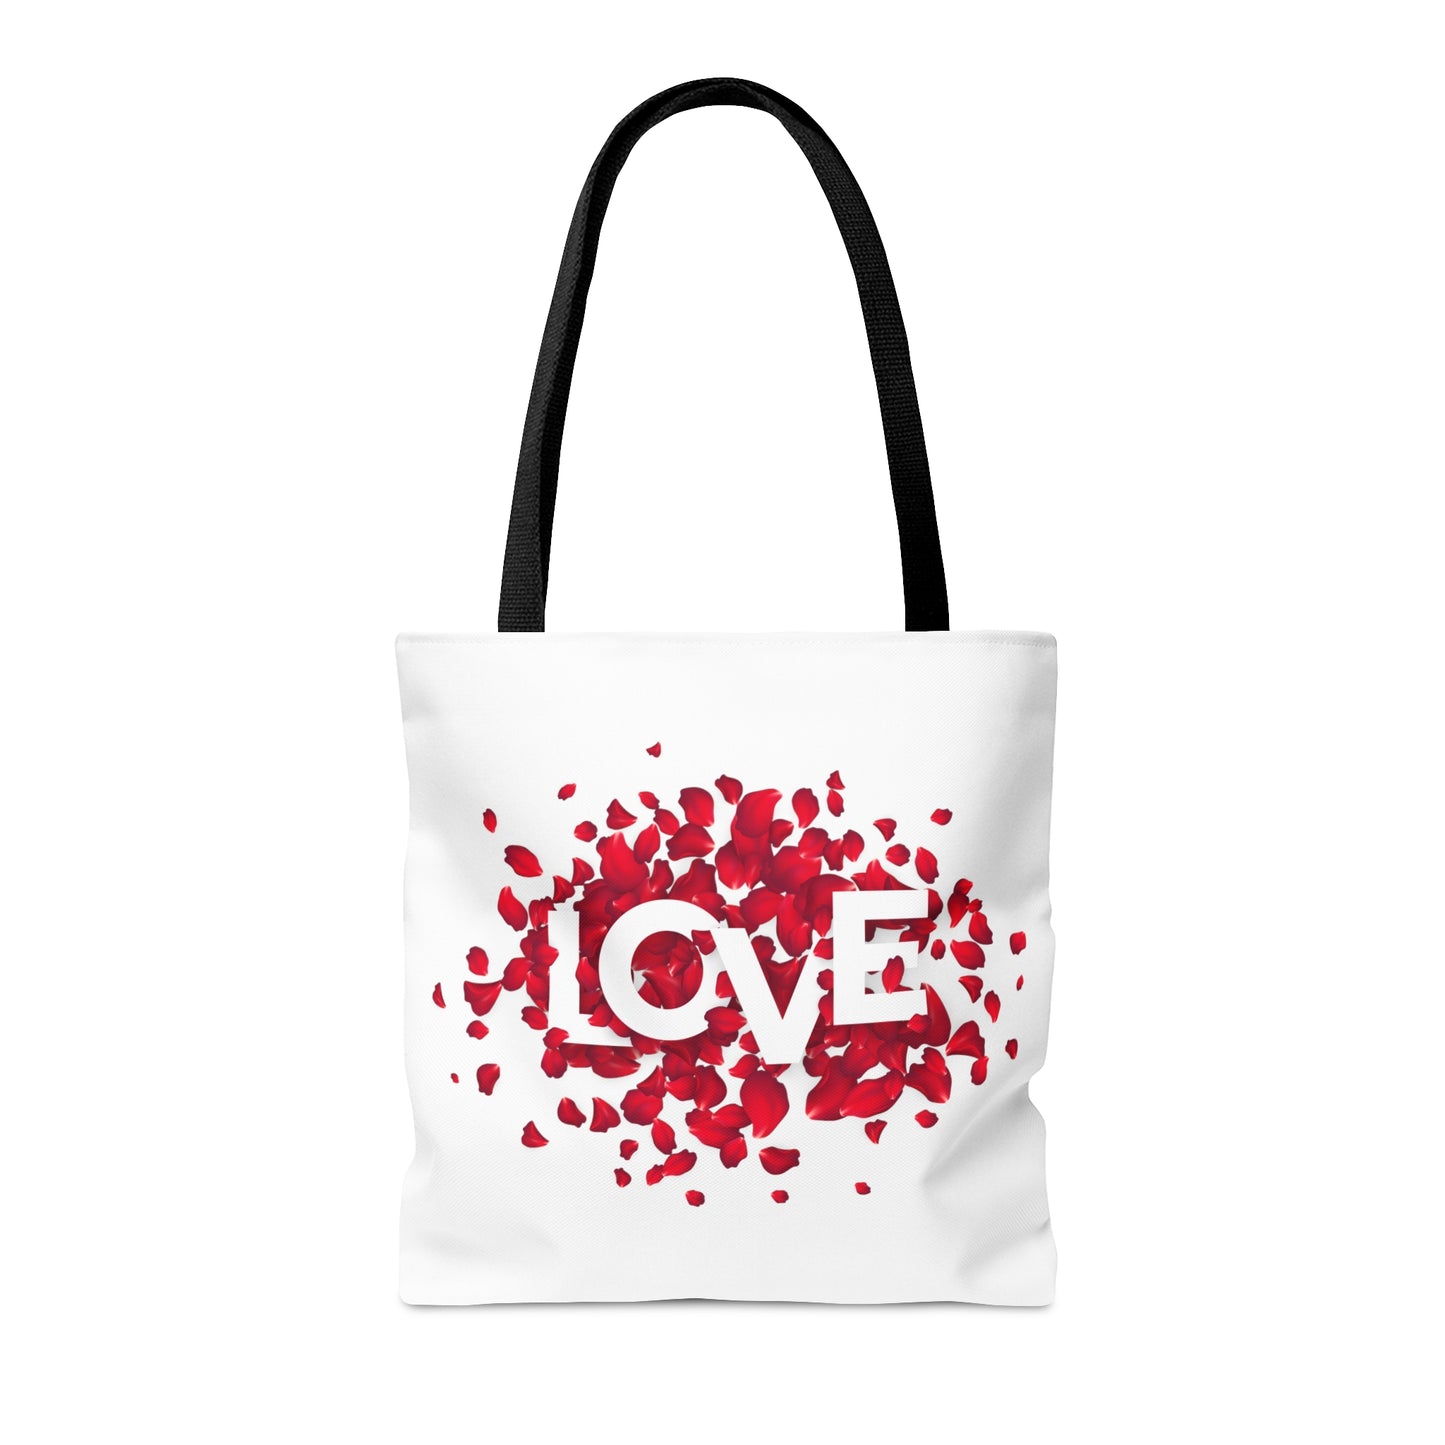 Stylish Love with Flowers Printed Tote Bag, Valentine's Tote Bag